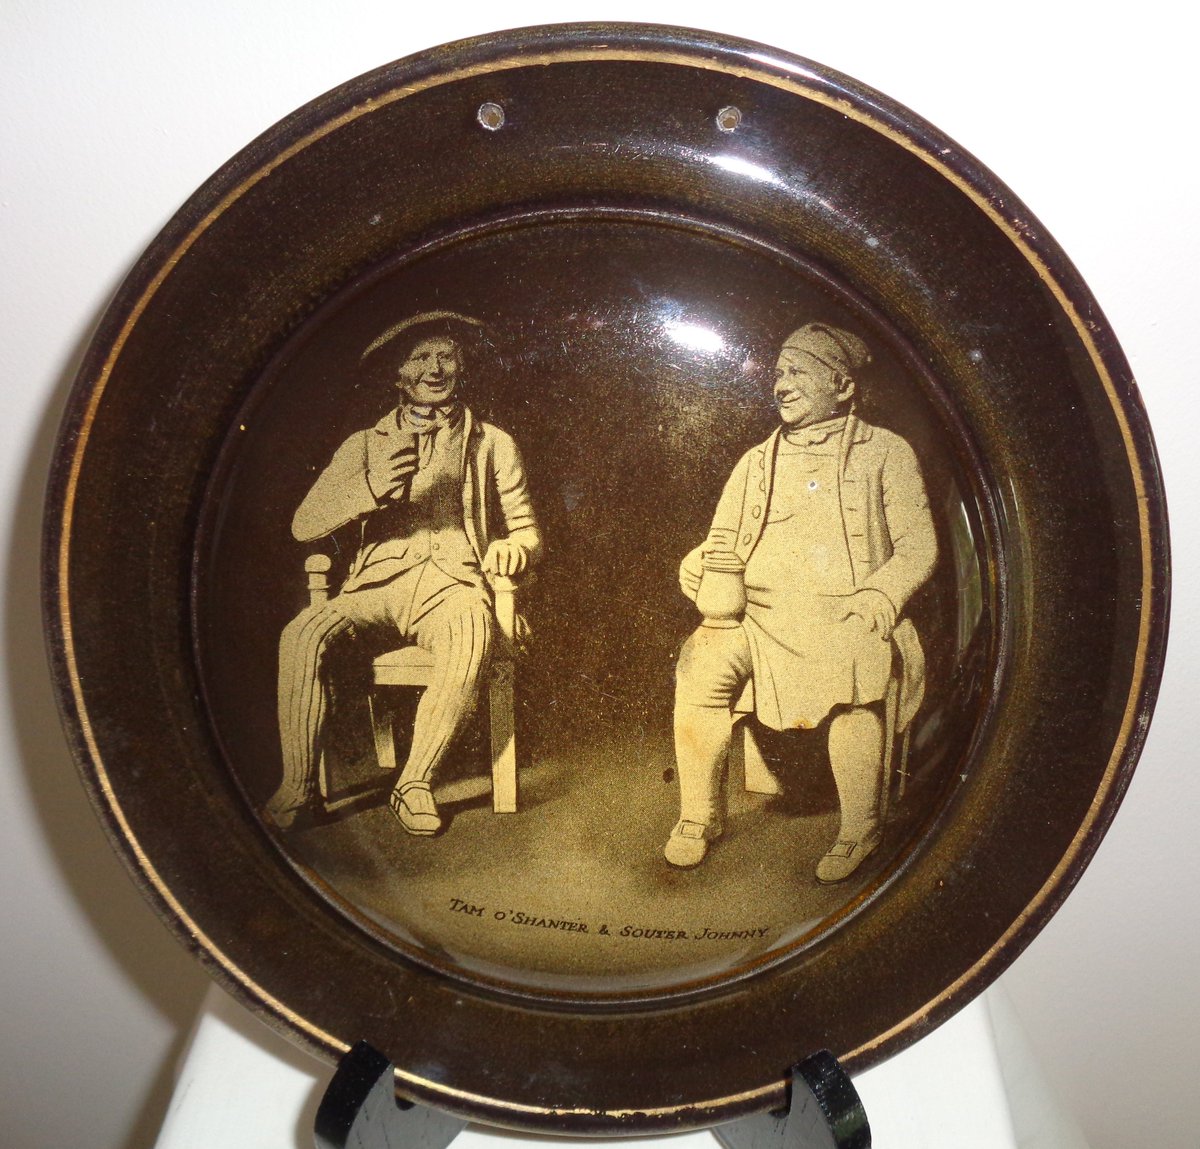 RARE Antique #Ridgways #Pottery Sepia 20cm Robbie Burns Collector’s Plate. Based on James Thom's Statues of Tam O'Shanter & Souter Johnny etsy.me/2OLl8YT #tamoshanter #homedecor #staffordshire #amberware #jamesthom #robbieburns #scottishpoetry #scottish